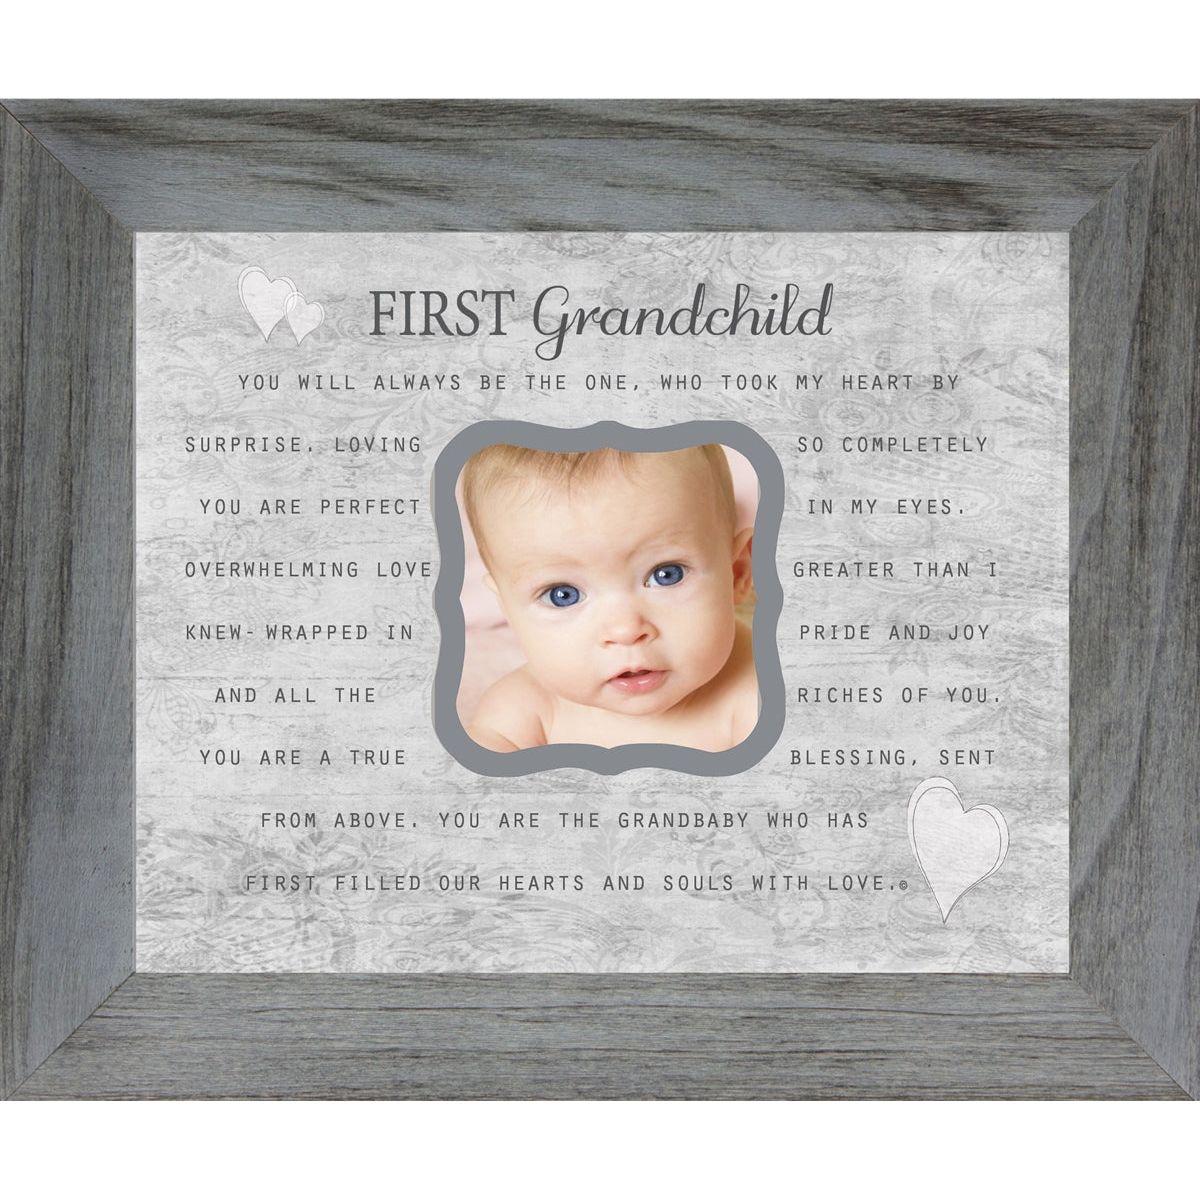 8x10 distressed gray real wood frame. Gray artwork with "First Grandchild" poem.  Artwork has a cut out for a photo.